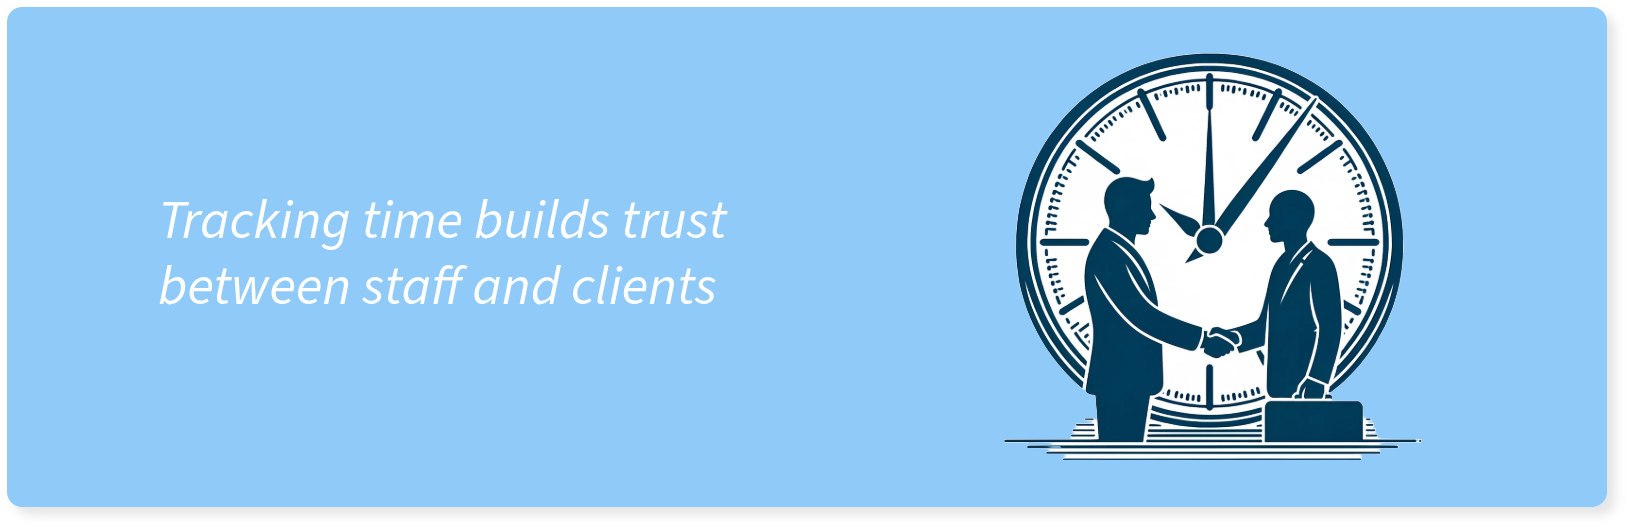 Tracking time builds trust between clients and staff.